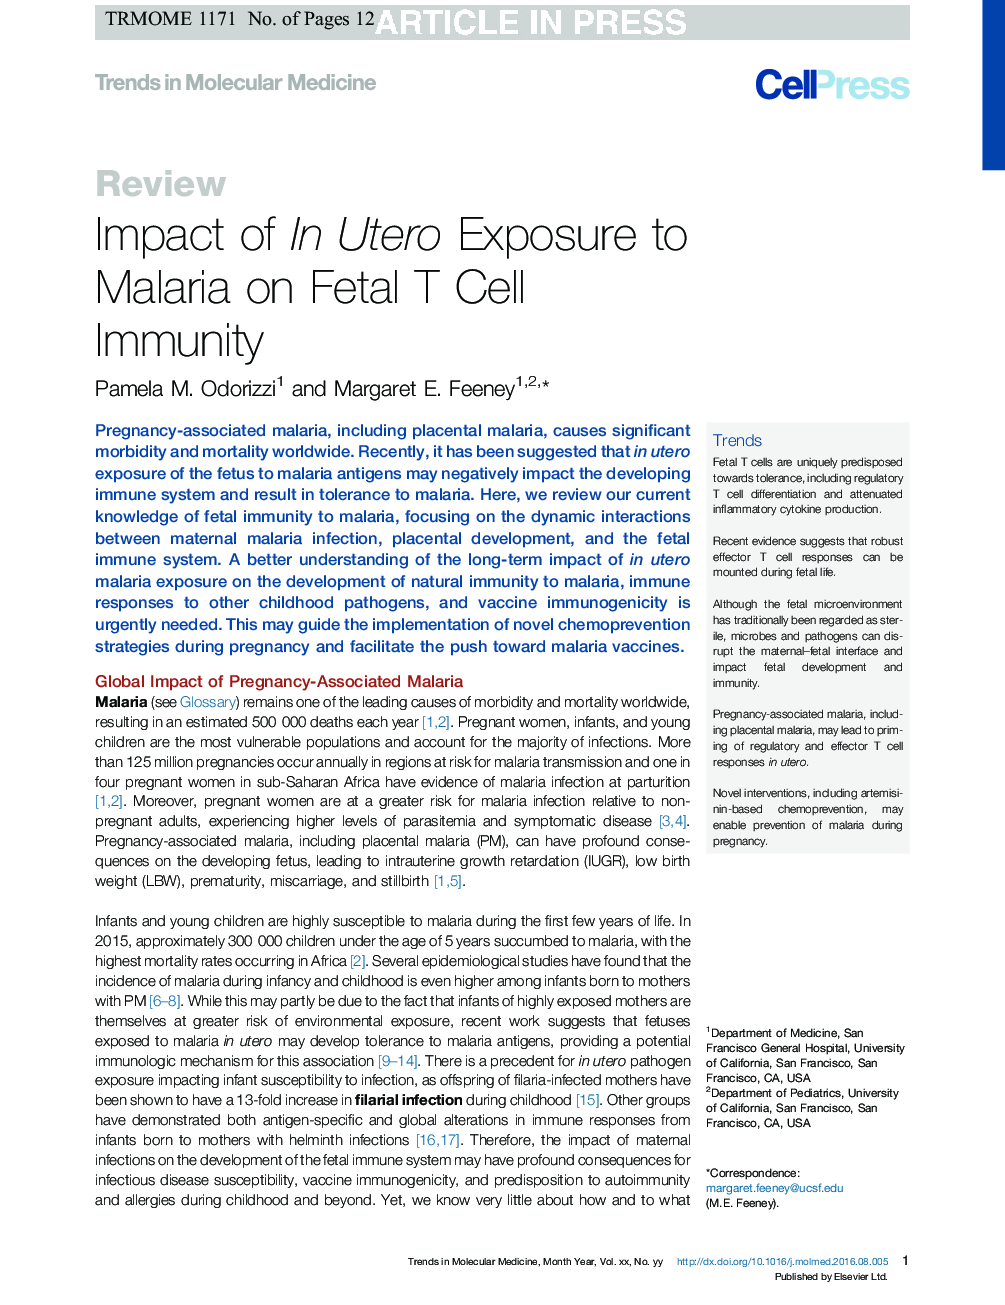 Impact of In Utero Exposure to Malaria on Fetal T Cell Immunity